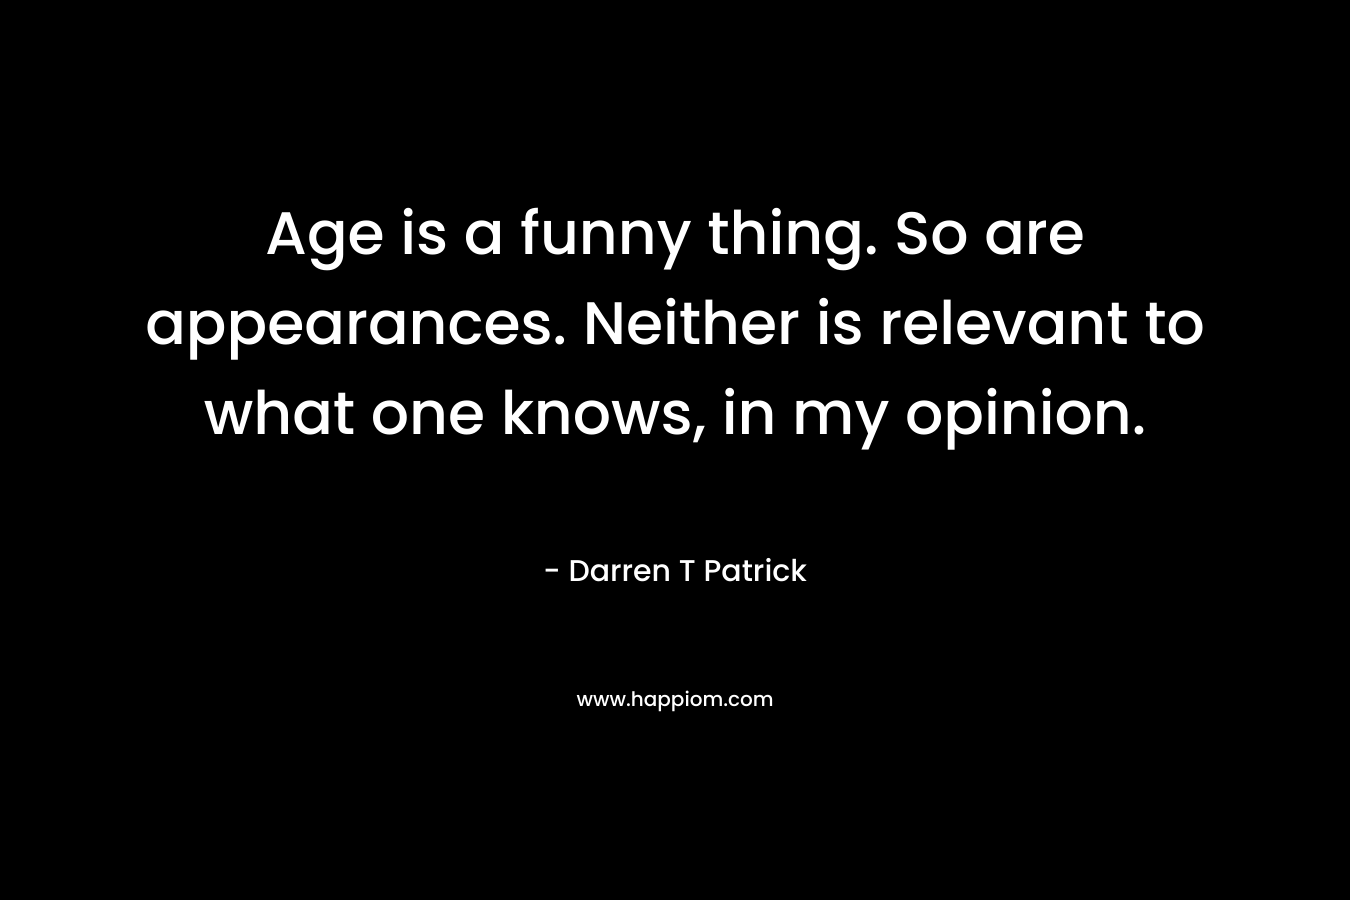 Age is a funny thing. So are appearances. Neither is relevant to what one knows, in my opinion.